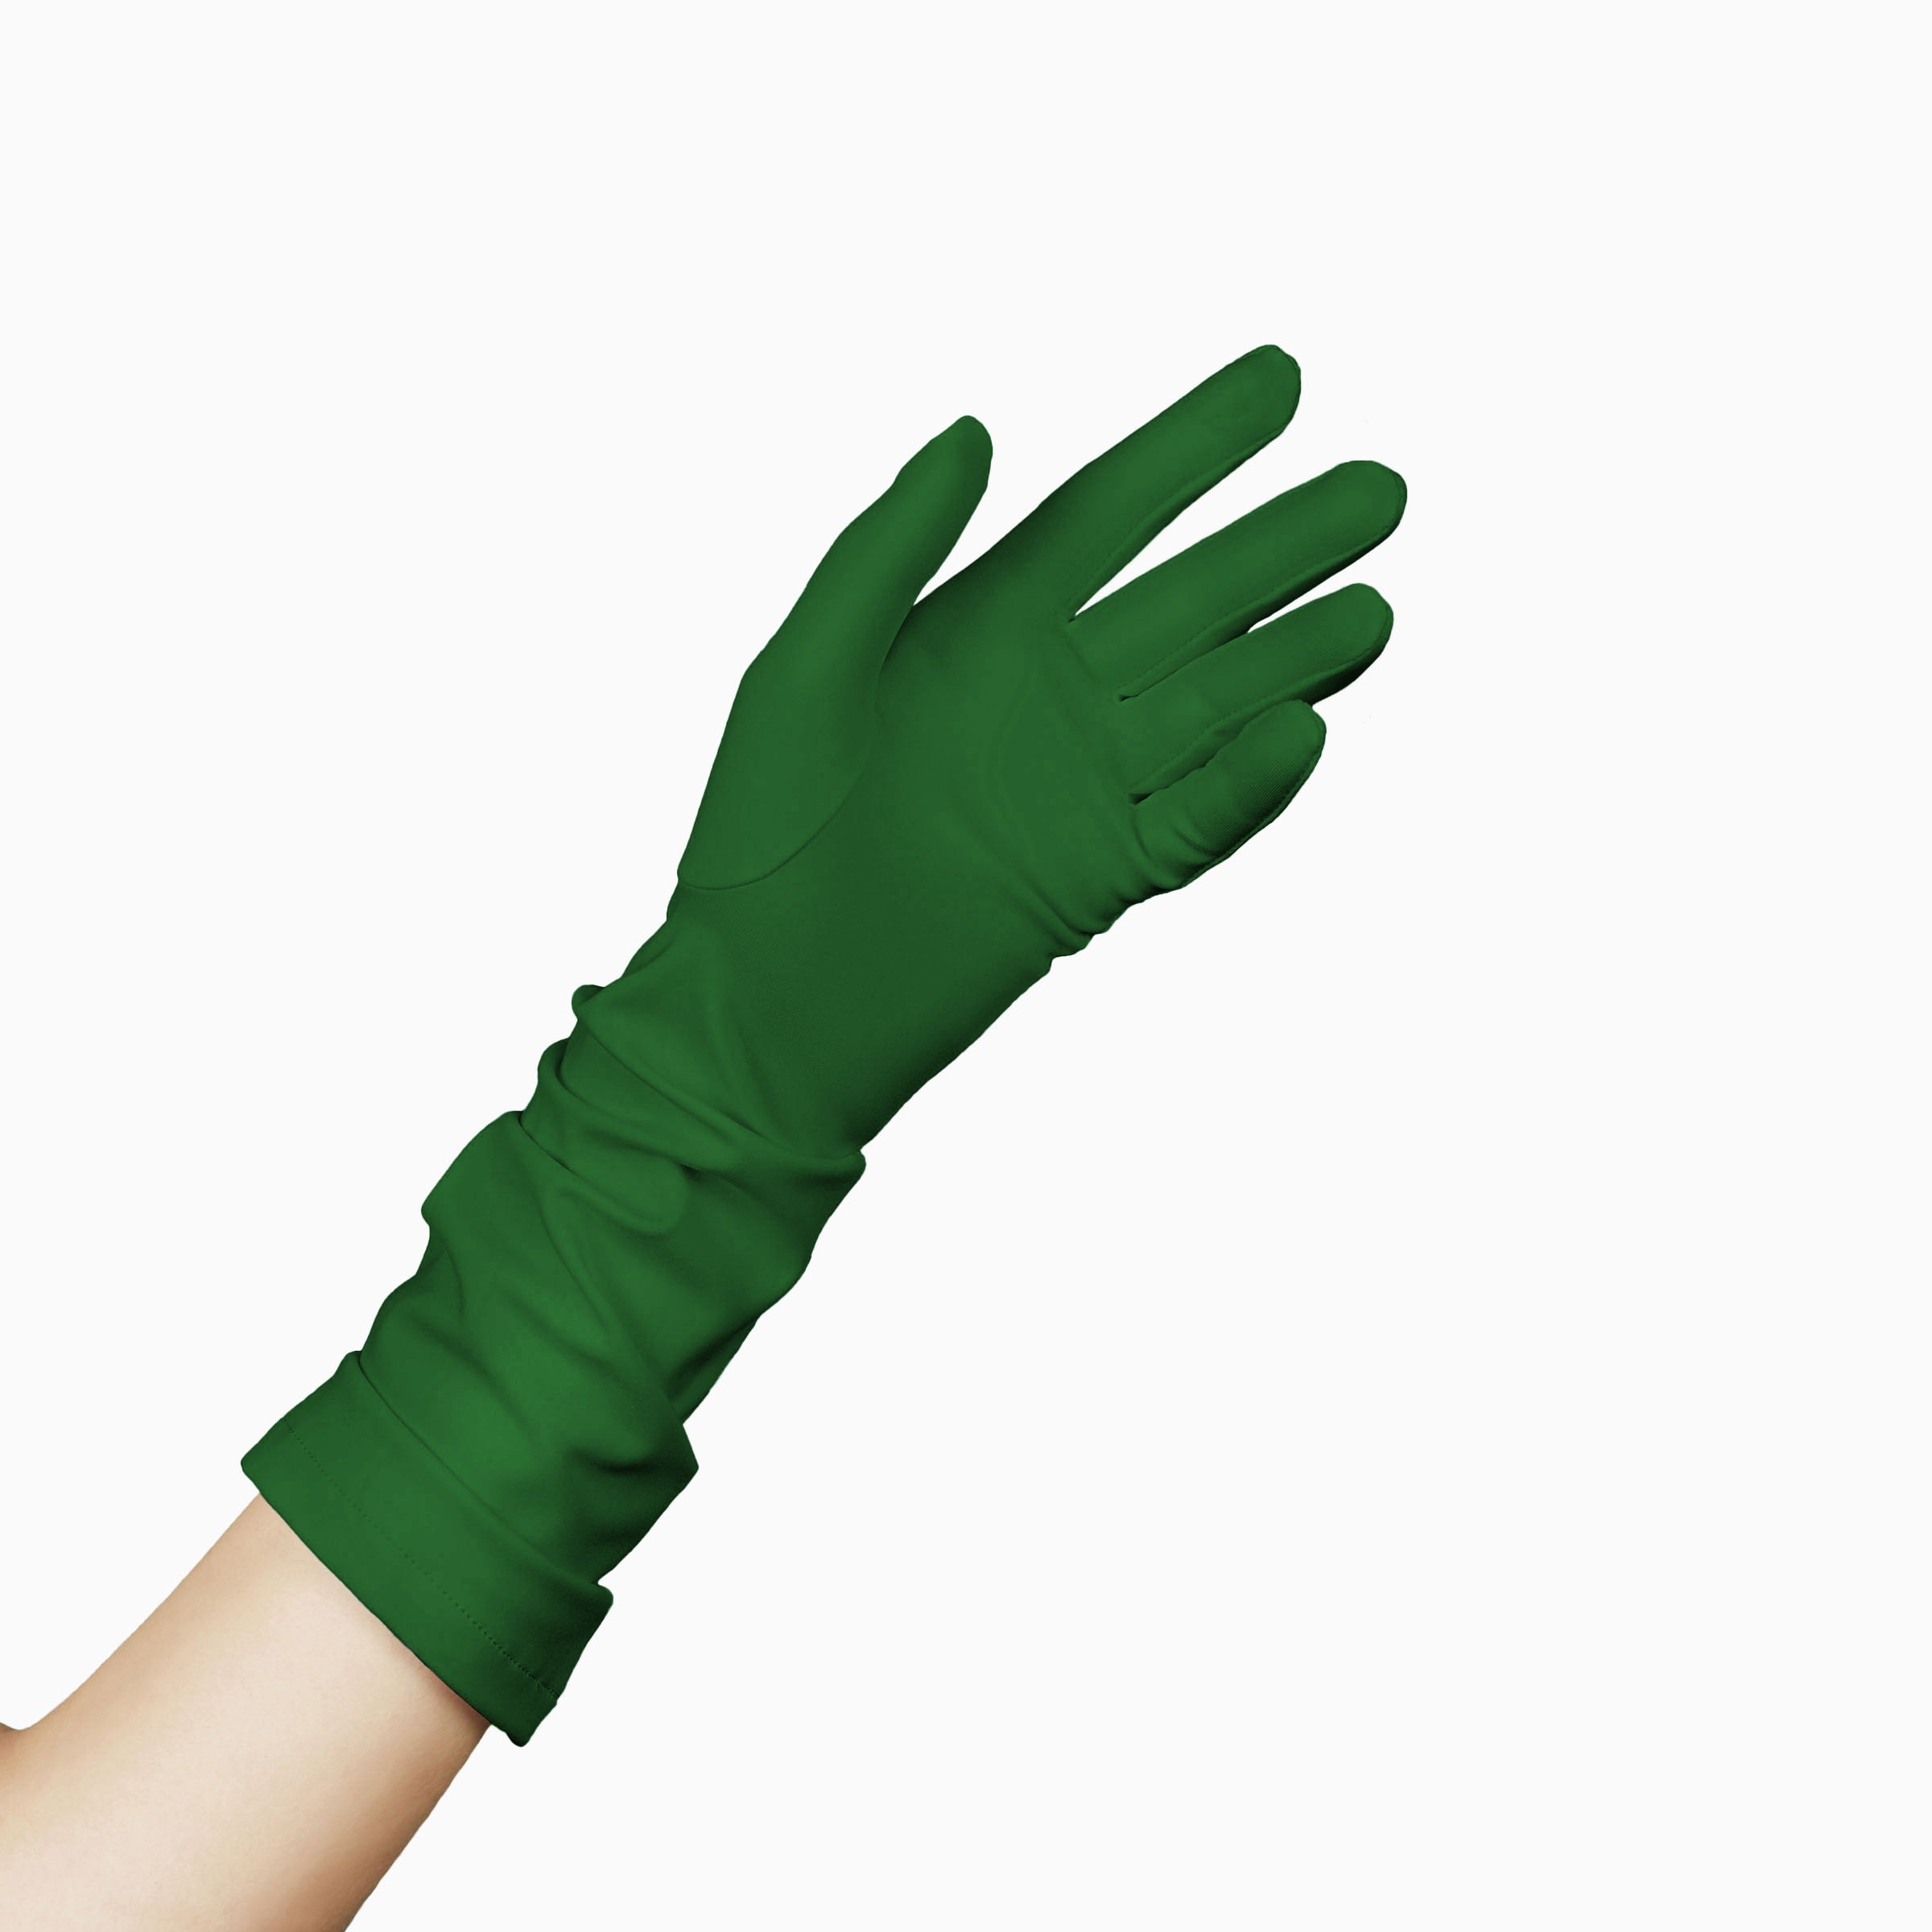 An elegant woman donning THE JILL - Green Mid Length Glove - Holiday Edition gloves from LadyFinch.